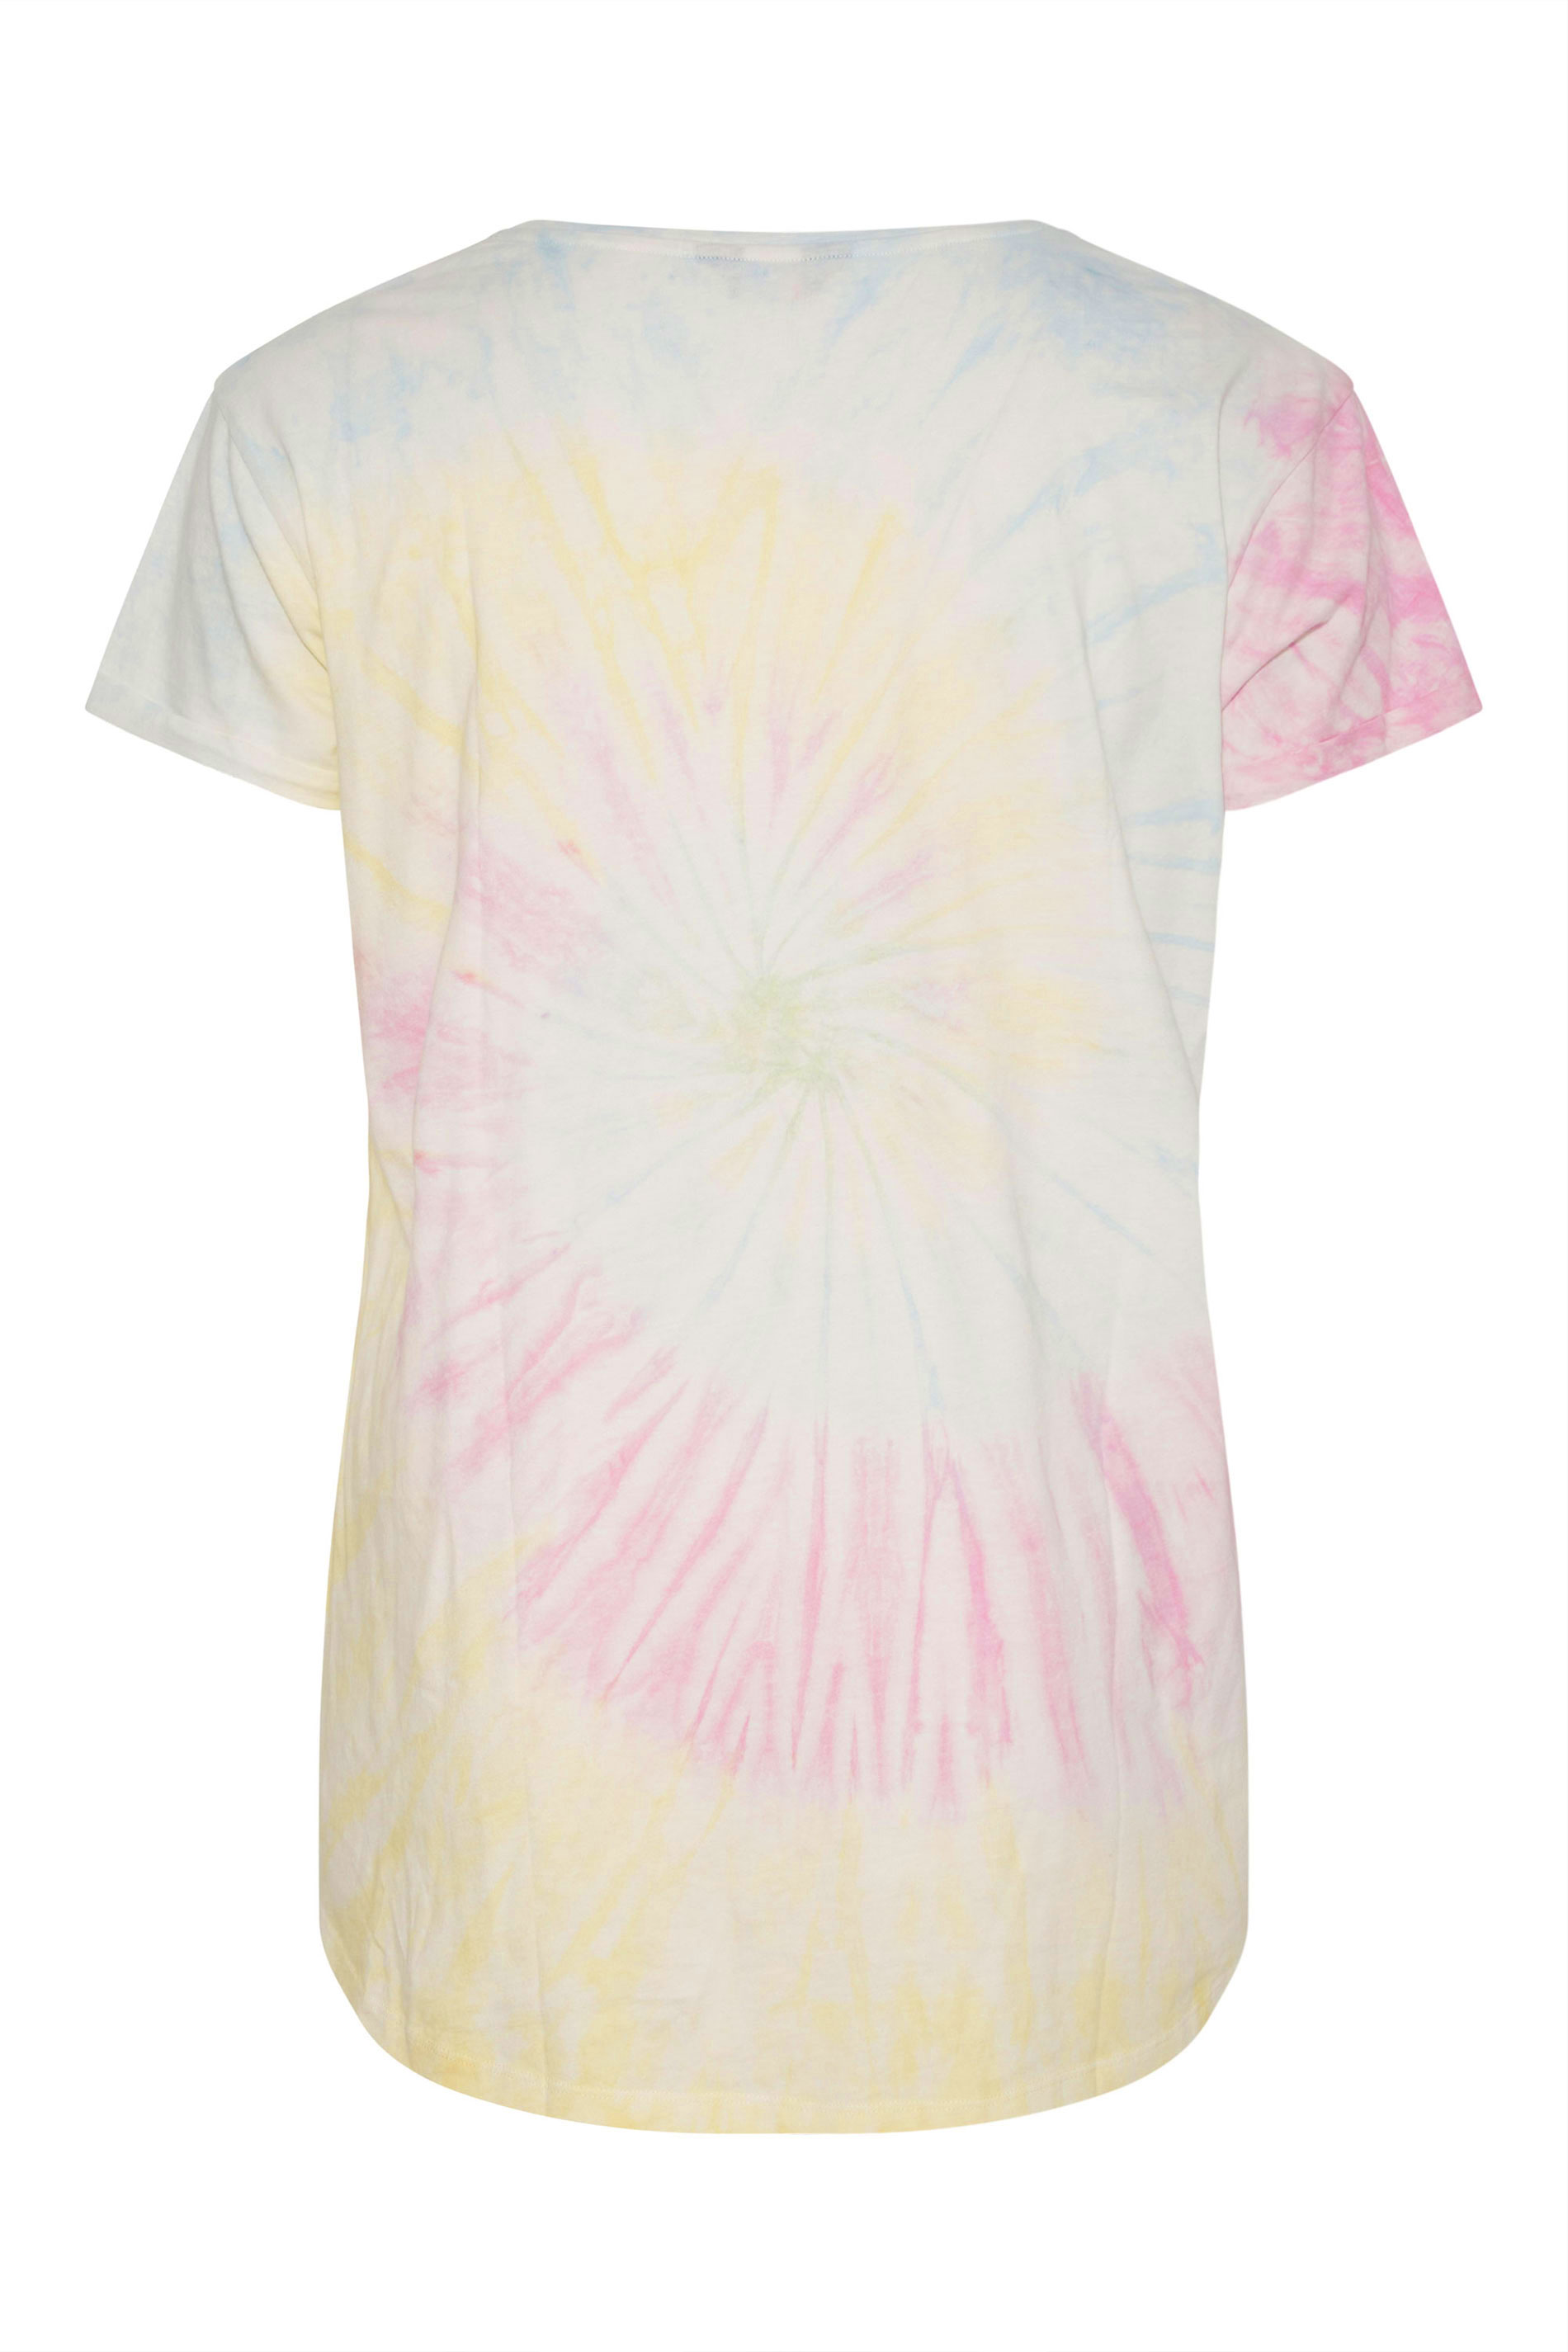 Grande taille  Tops Grande taille  T-Shirts | YOURS FOR GOOD - T-Shirt Blanc Tie & Dye - GE81265